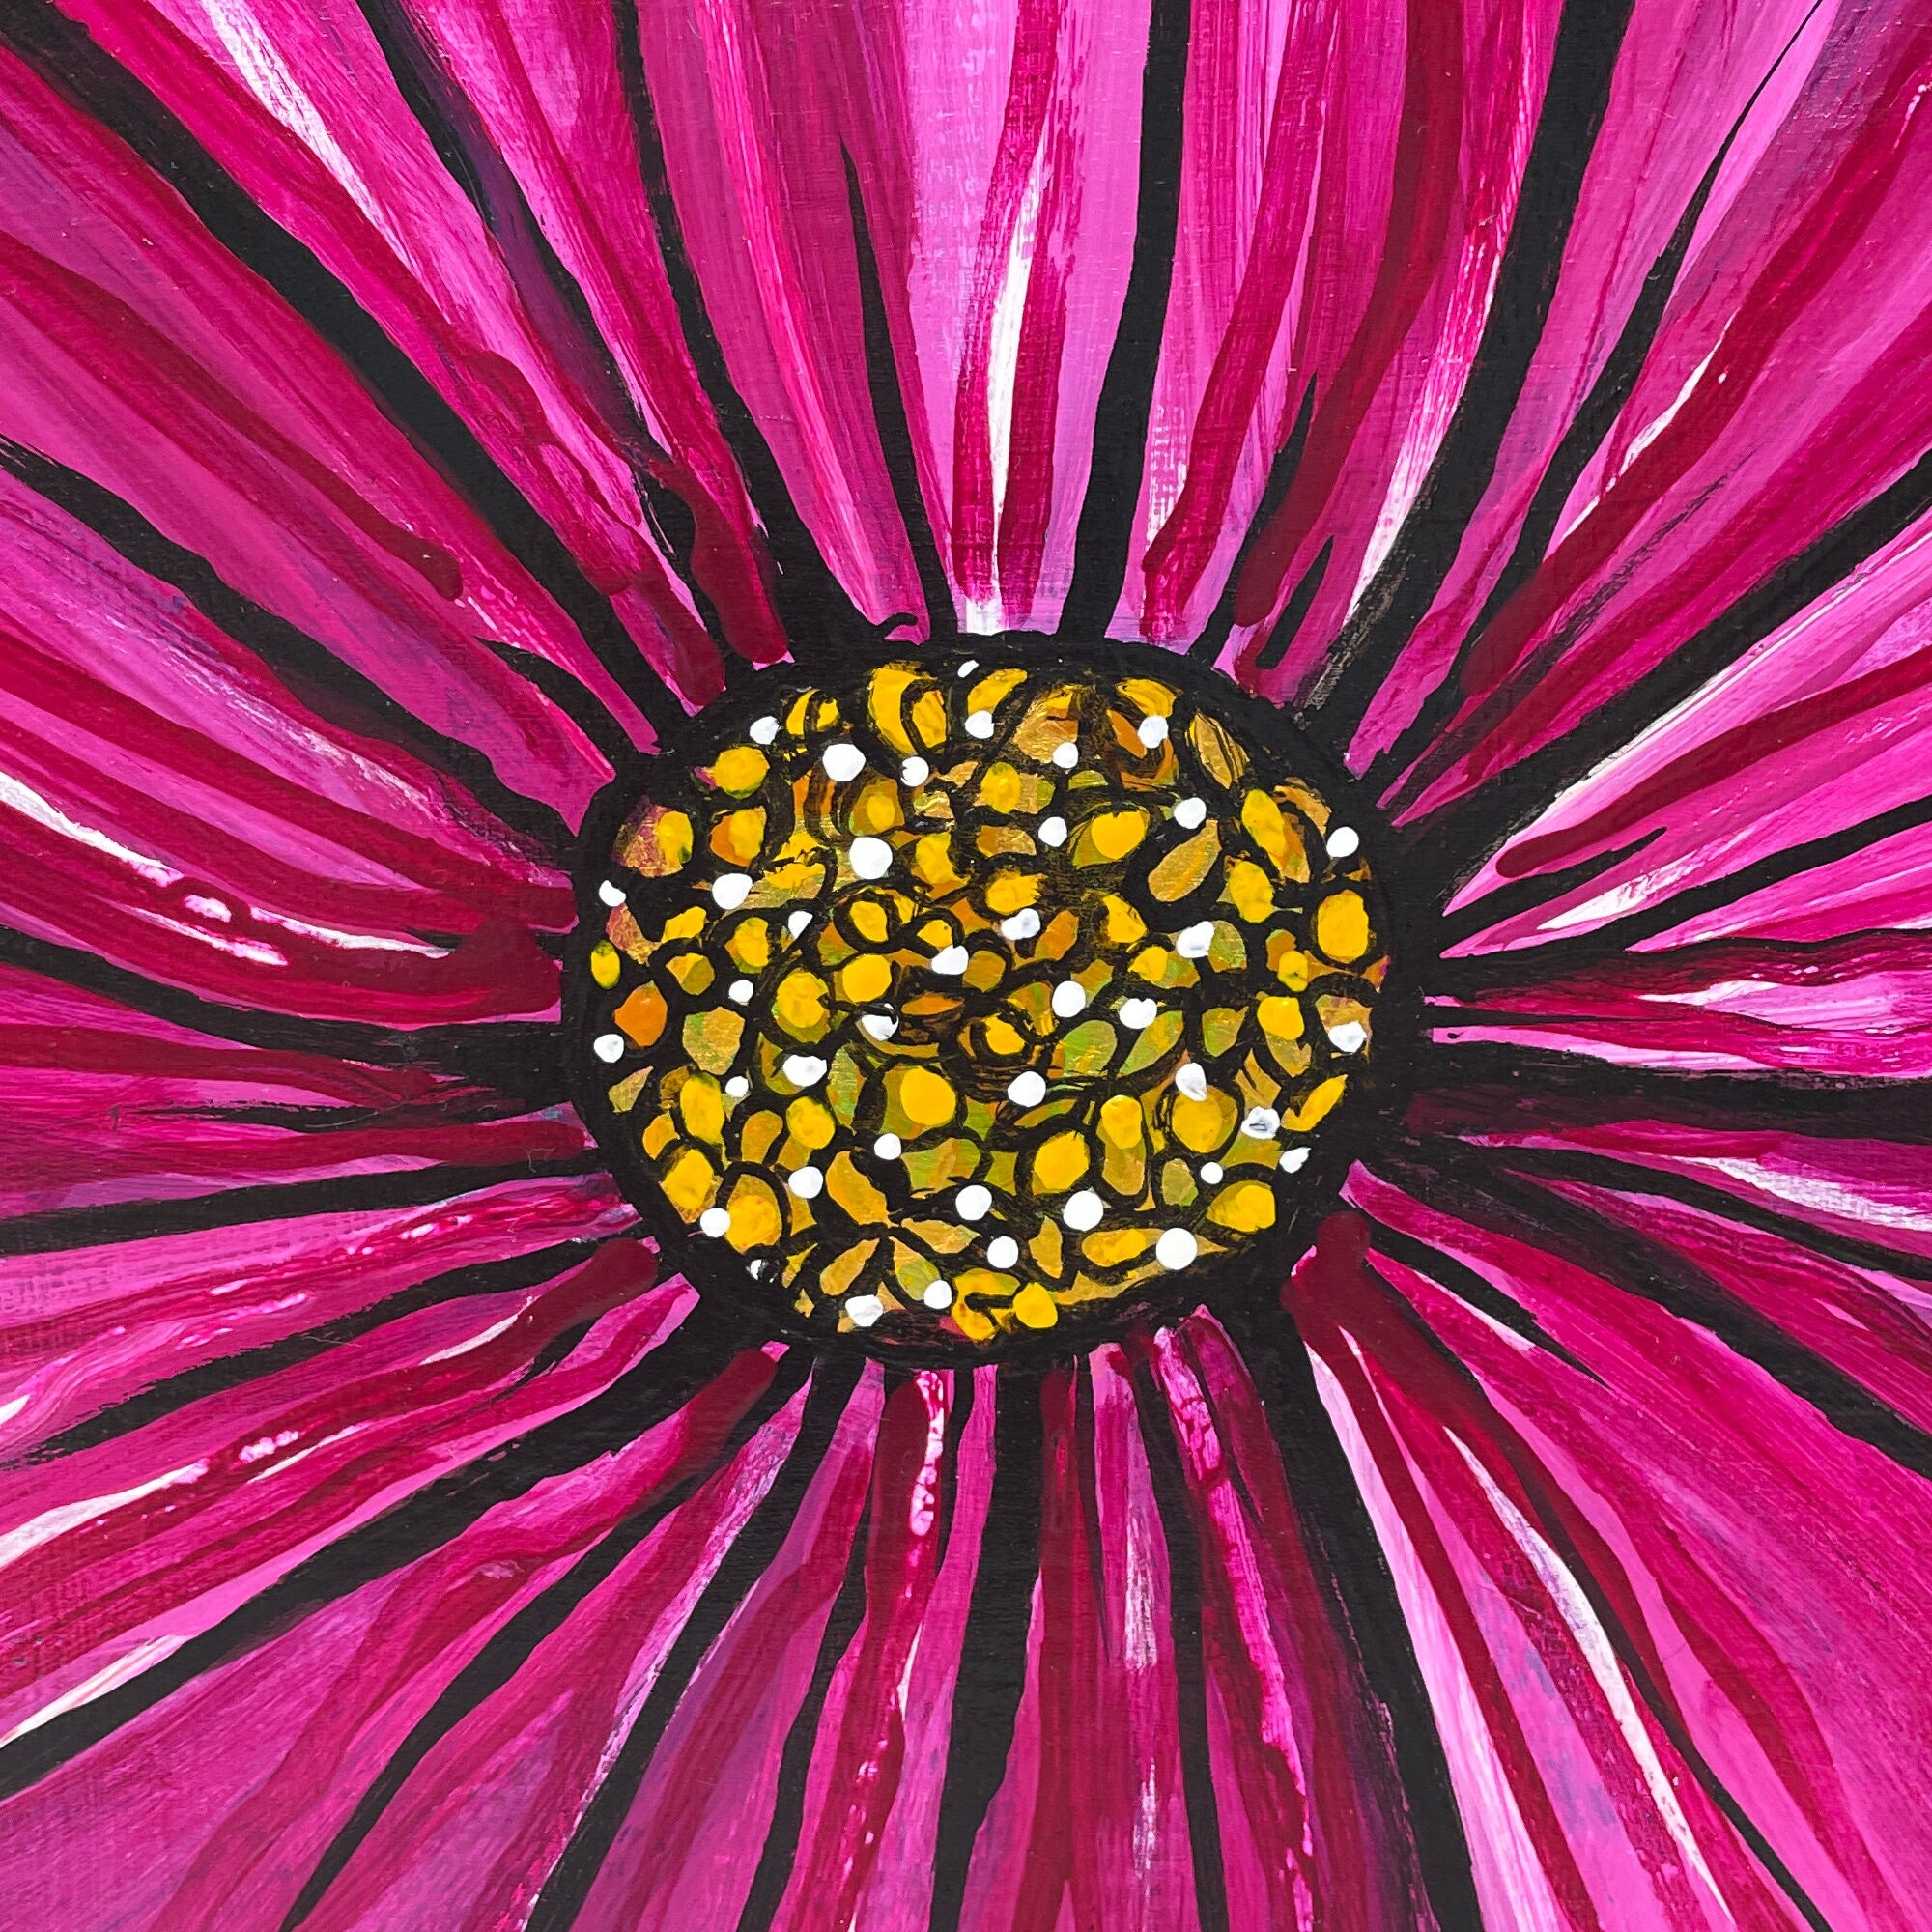 Zinnia Painting - Square Flower Painting - Original Floral Art - Magenta, Yellow, Blue - 12x12 inches